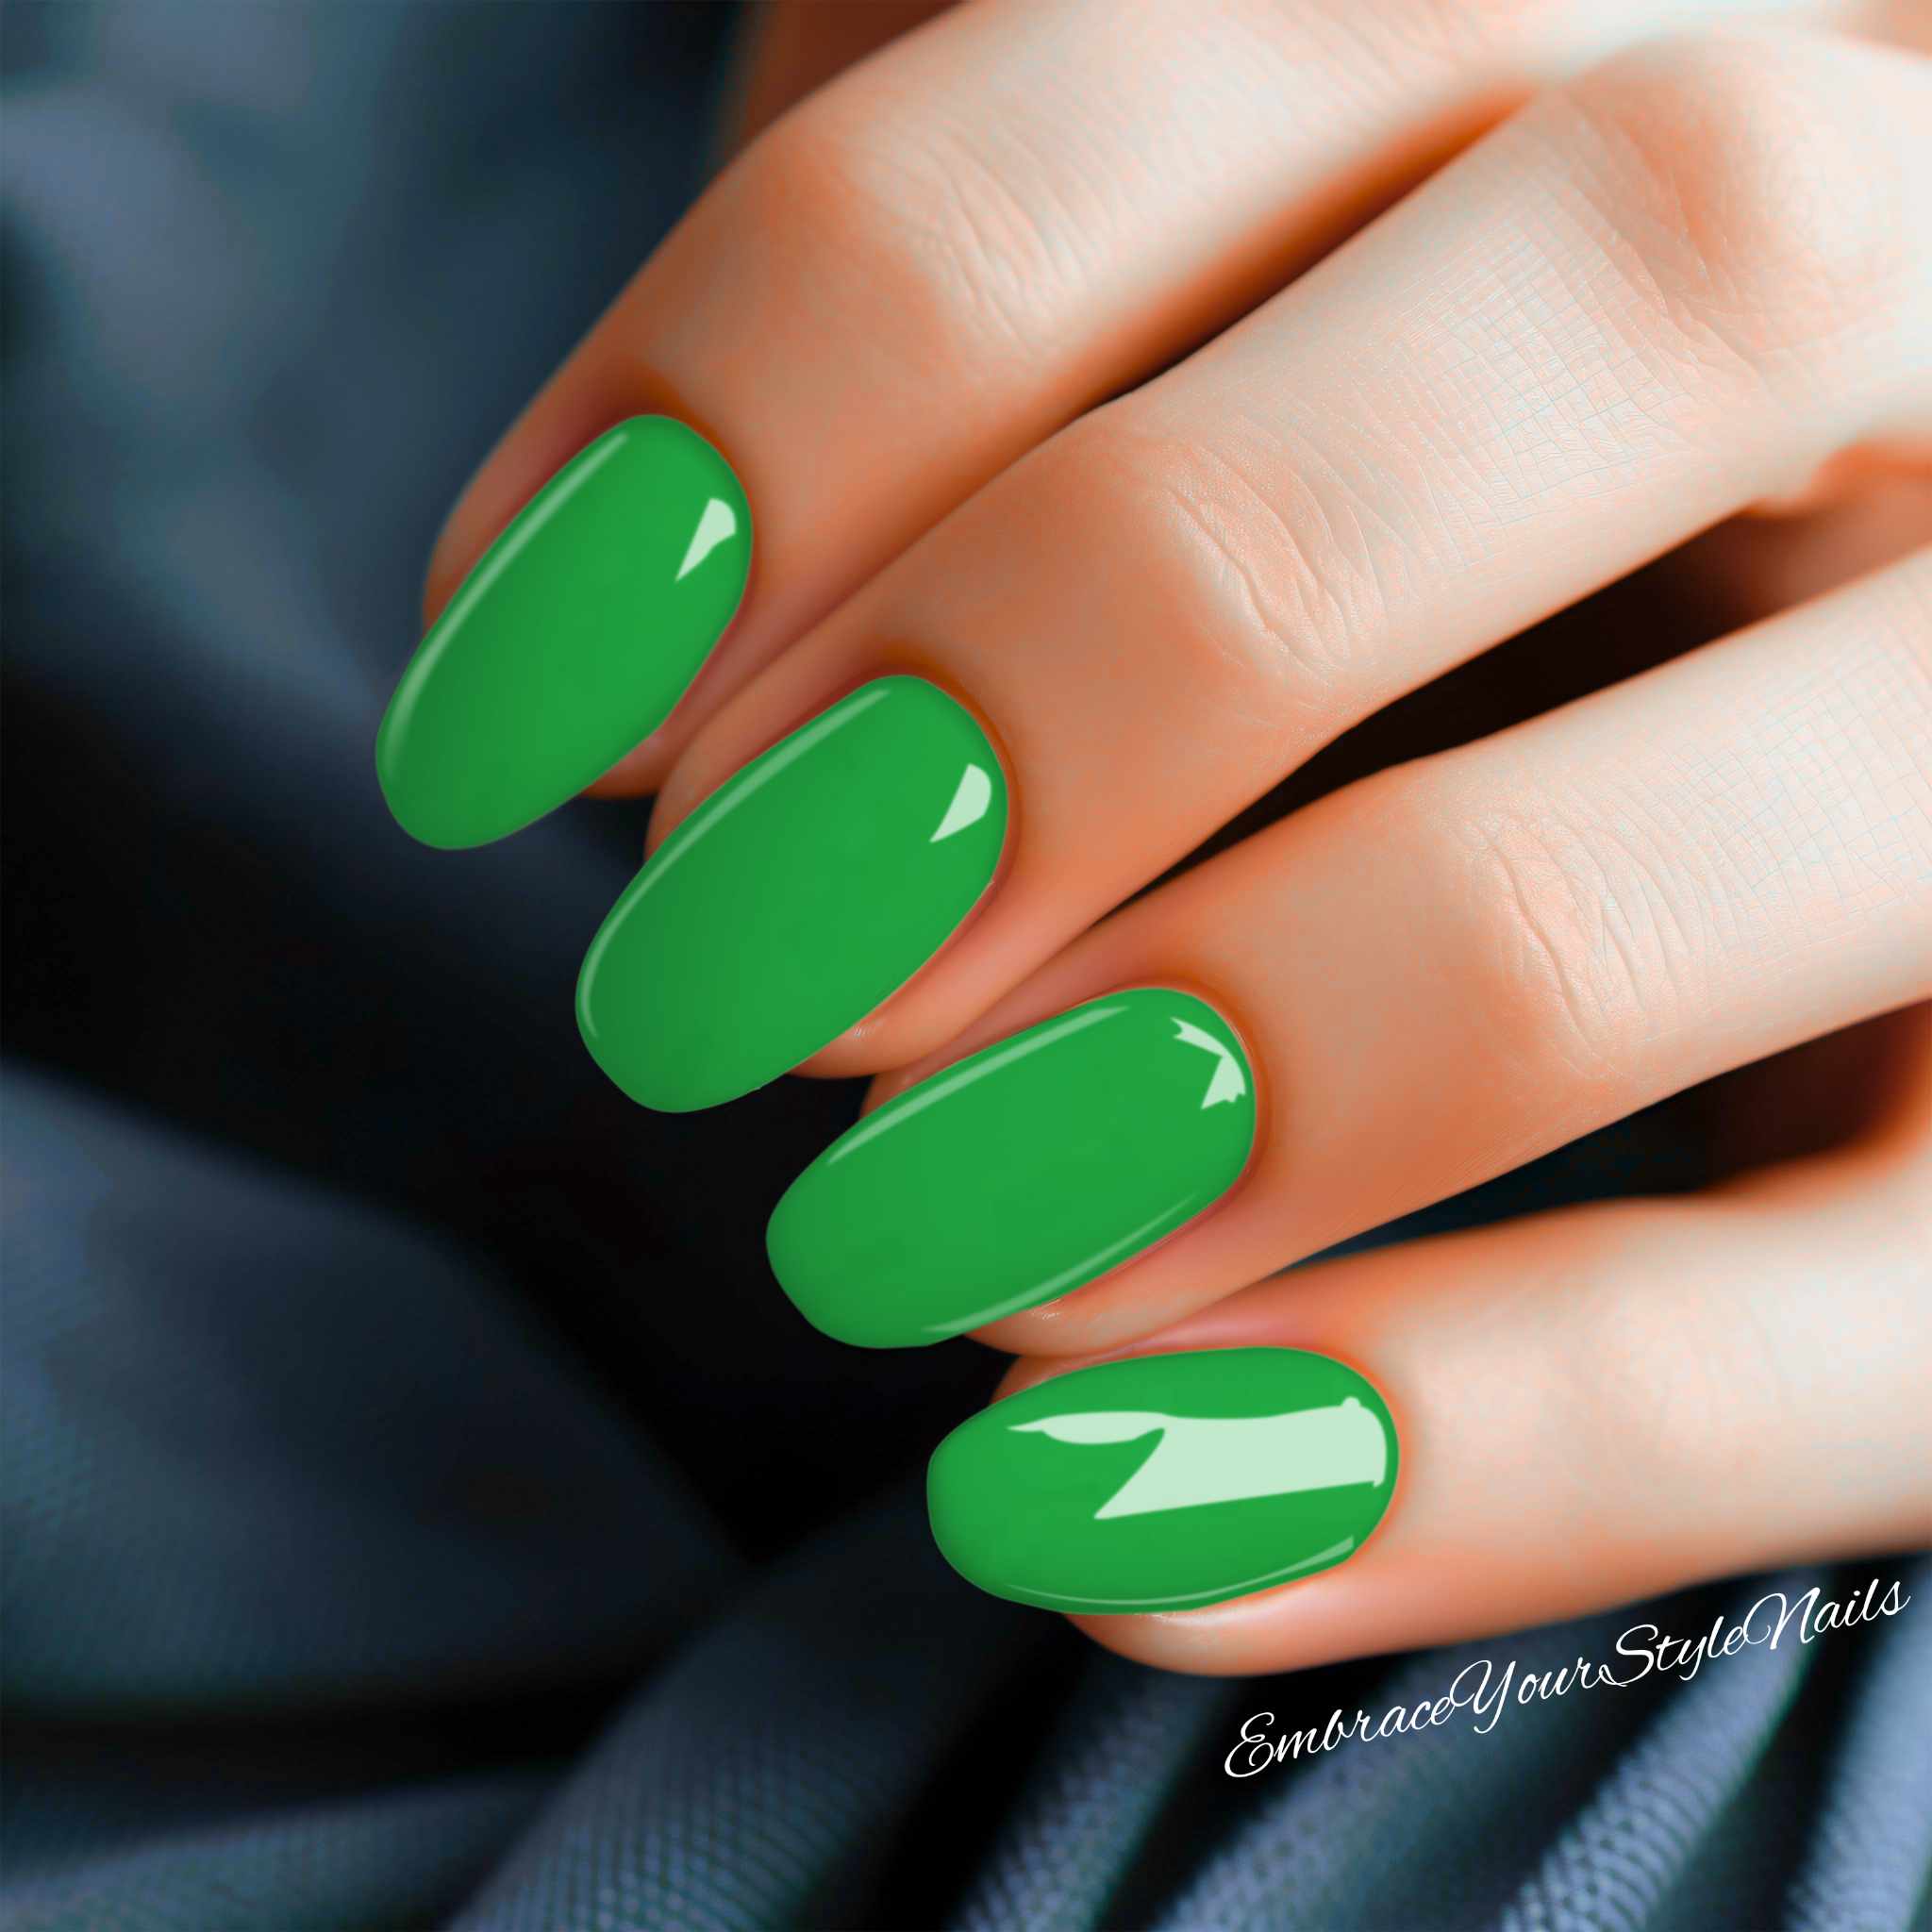 Chrome and neon green nails : r/Nails